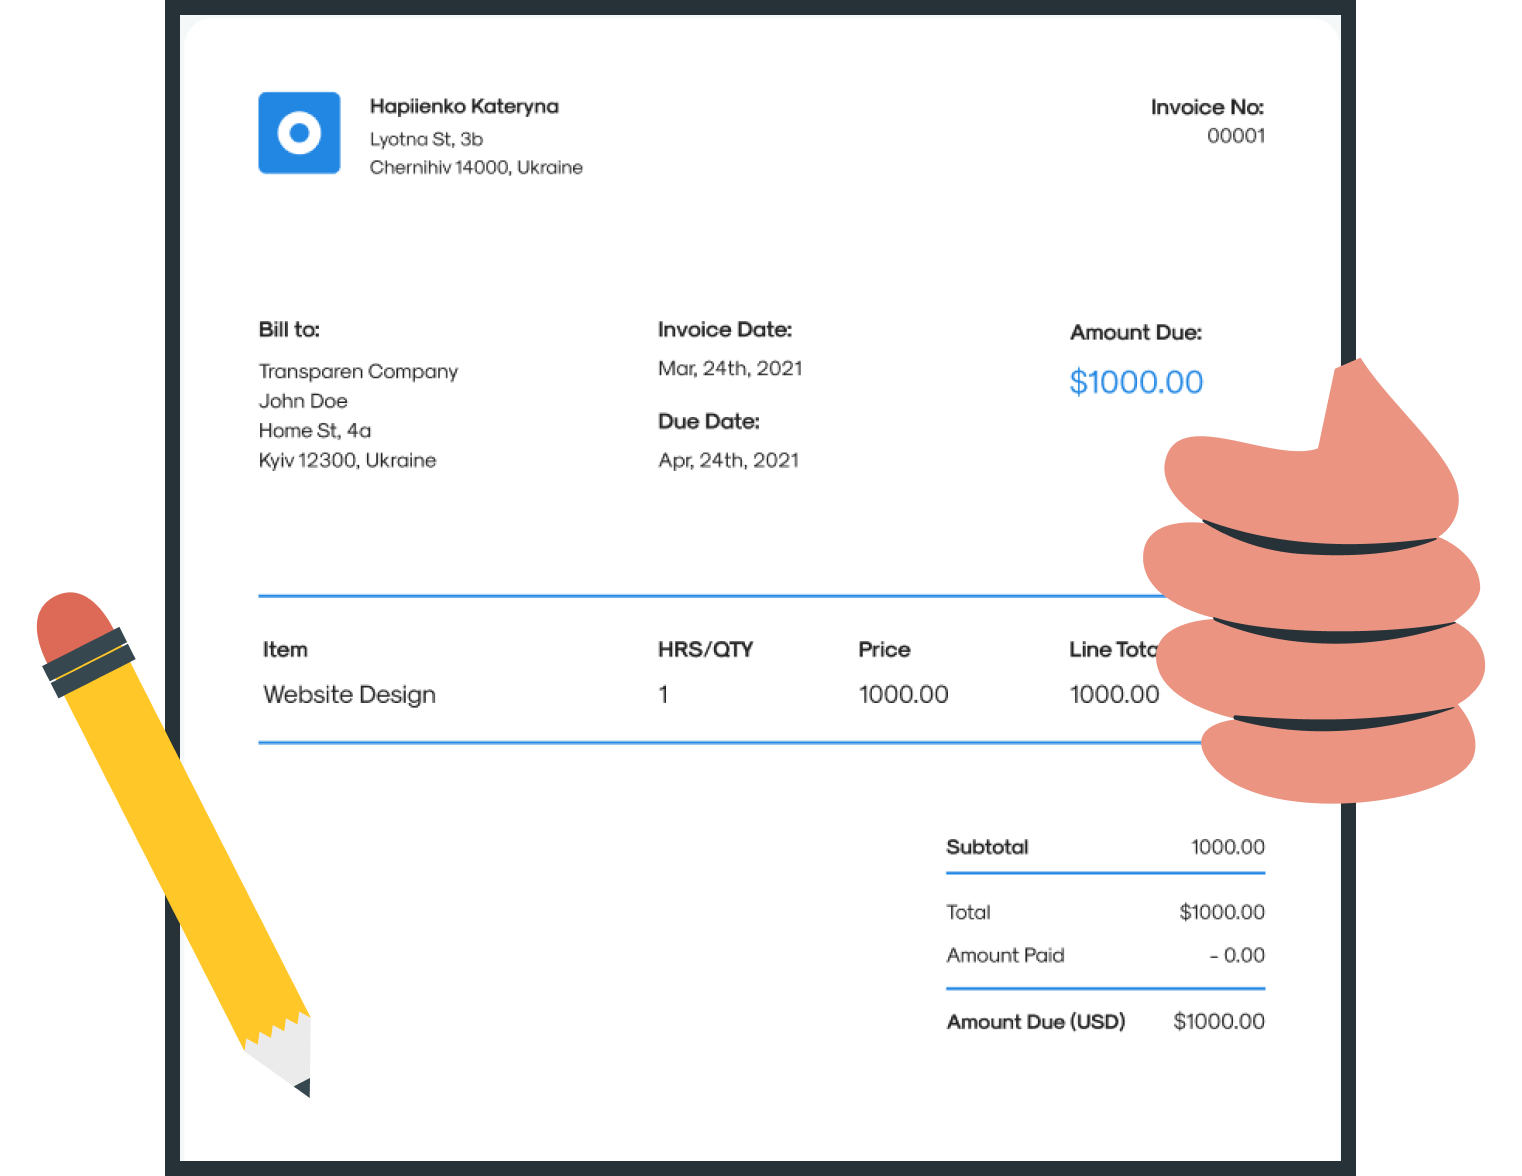 Invoice created with online invoicing software InvoiceBerry